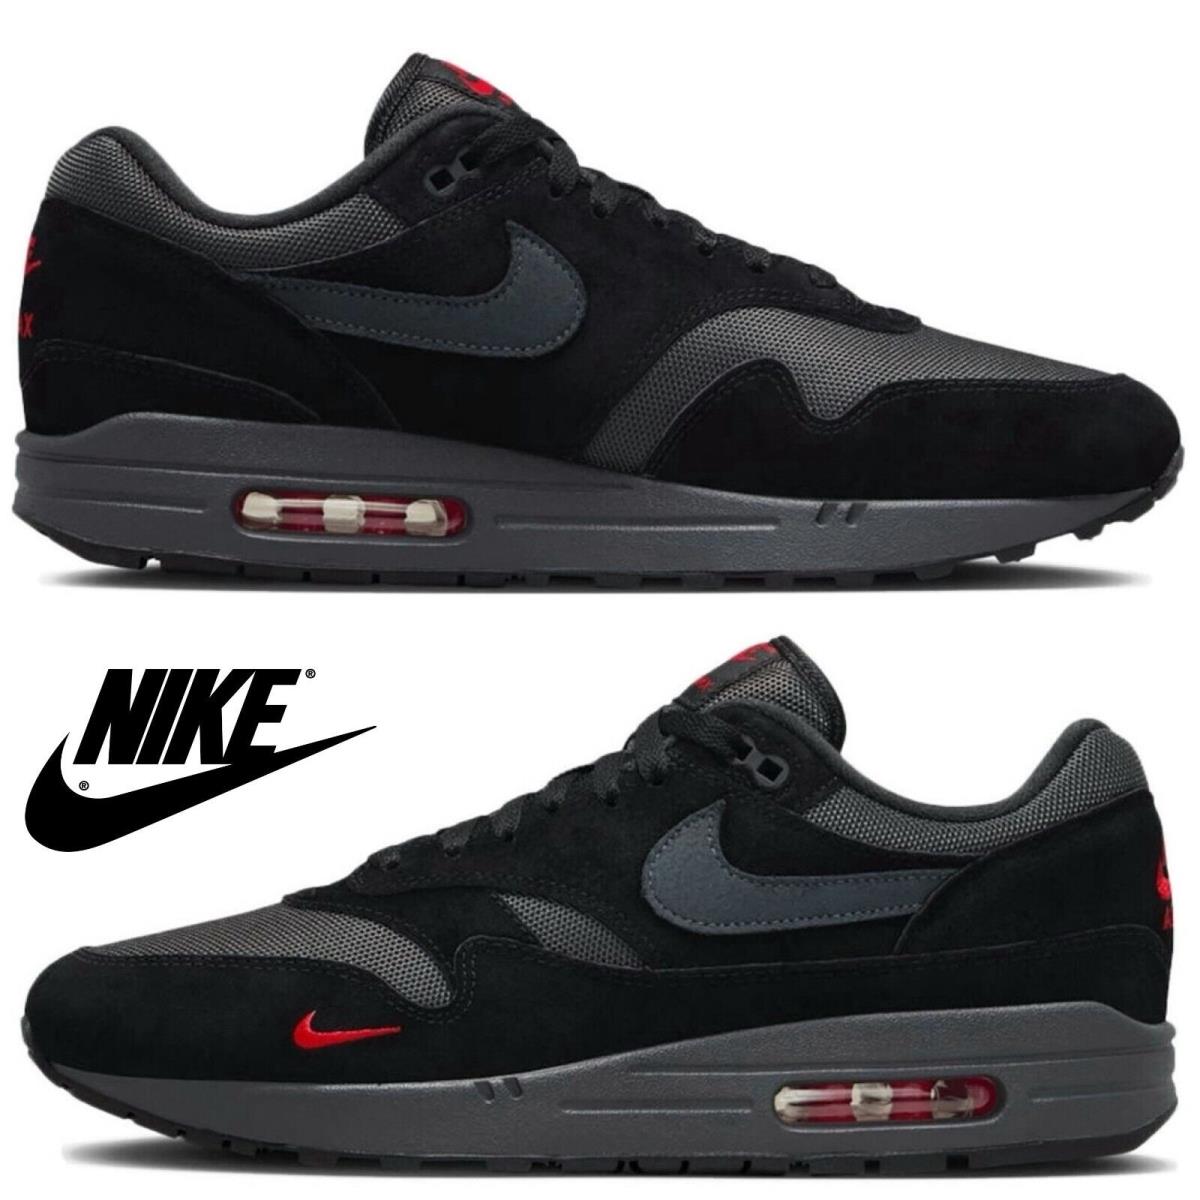 Nike Air Max 1 Men`s Running Sneakers Athletic Sport Casual Comfort Shoes Black - Black, Maufacturer: Black | Anthracite | University Red